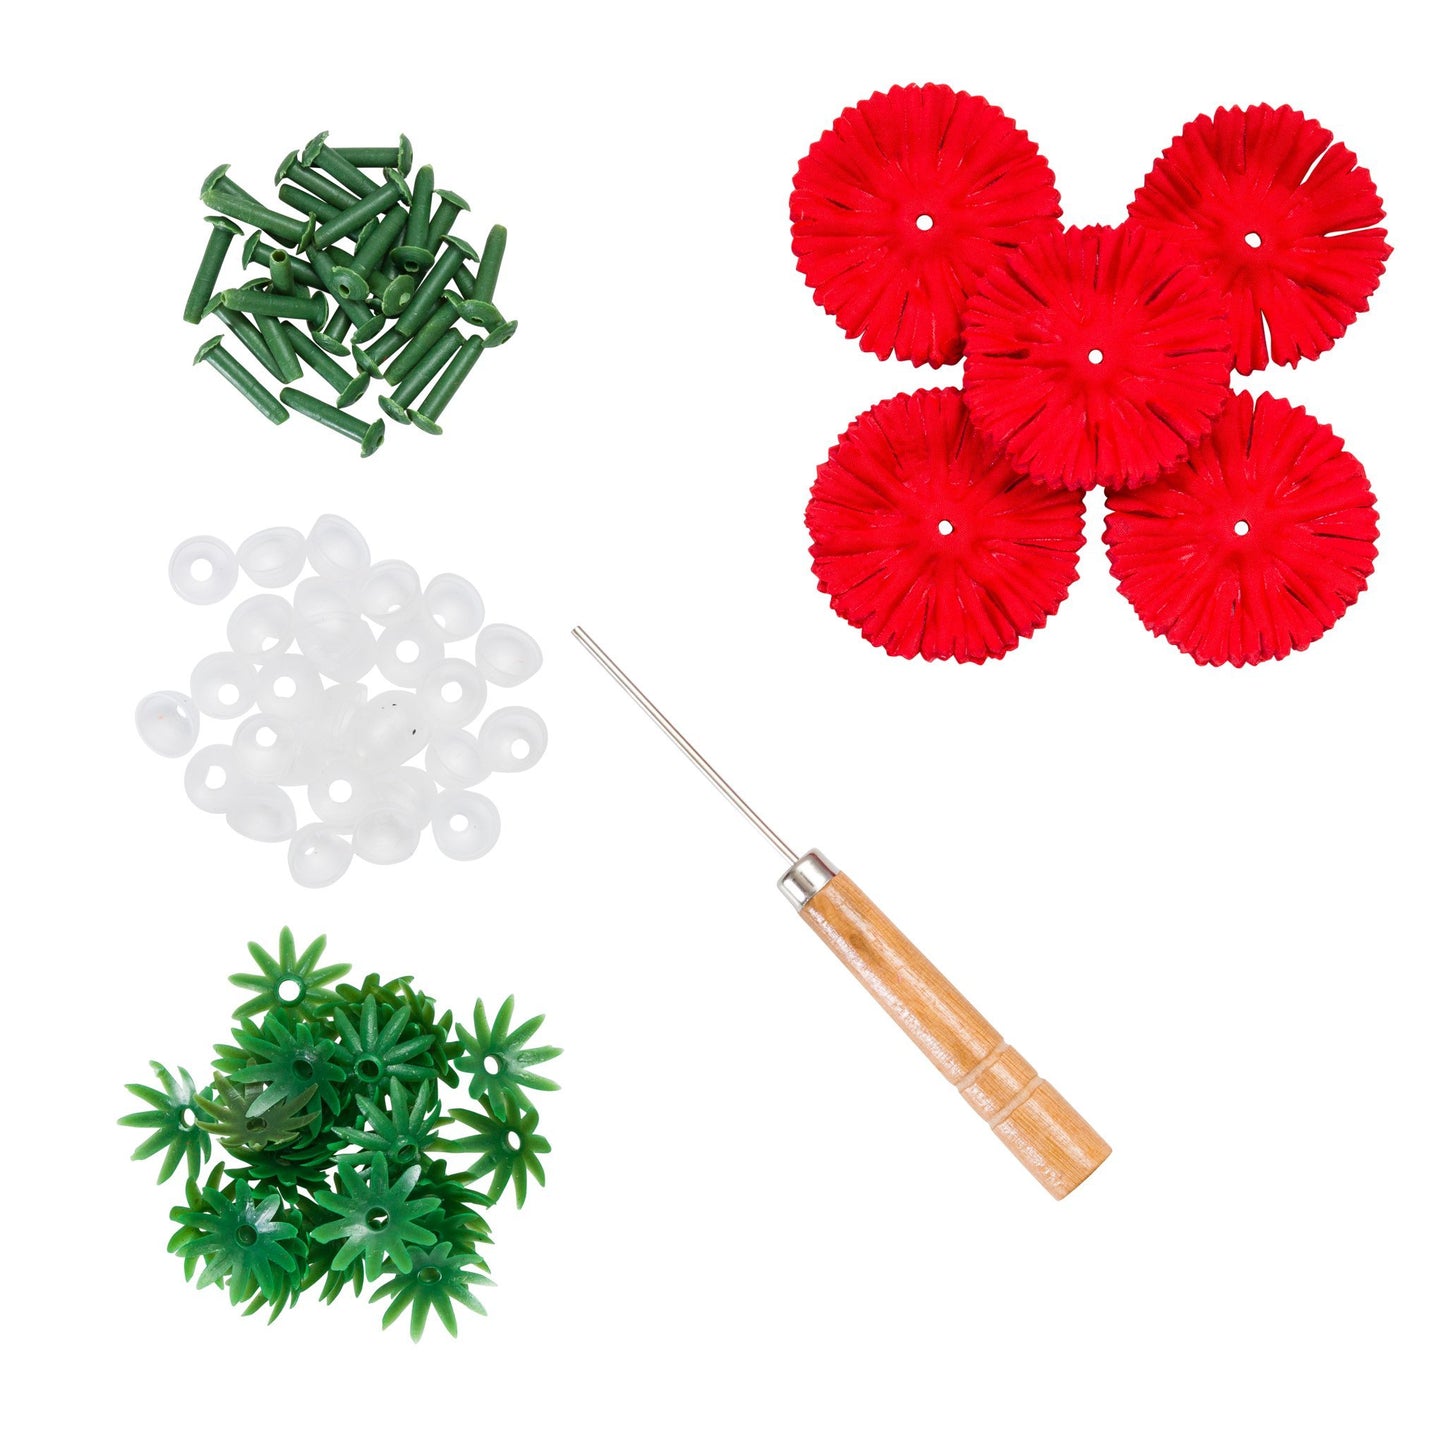 Flower Making Kit - Classic Carnations - RED - FF03RD